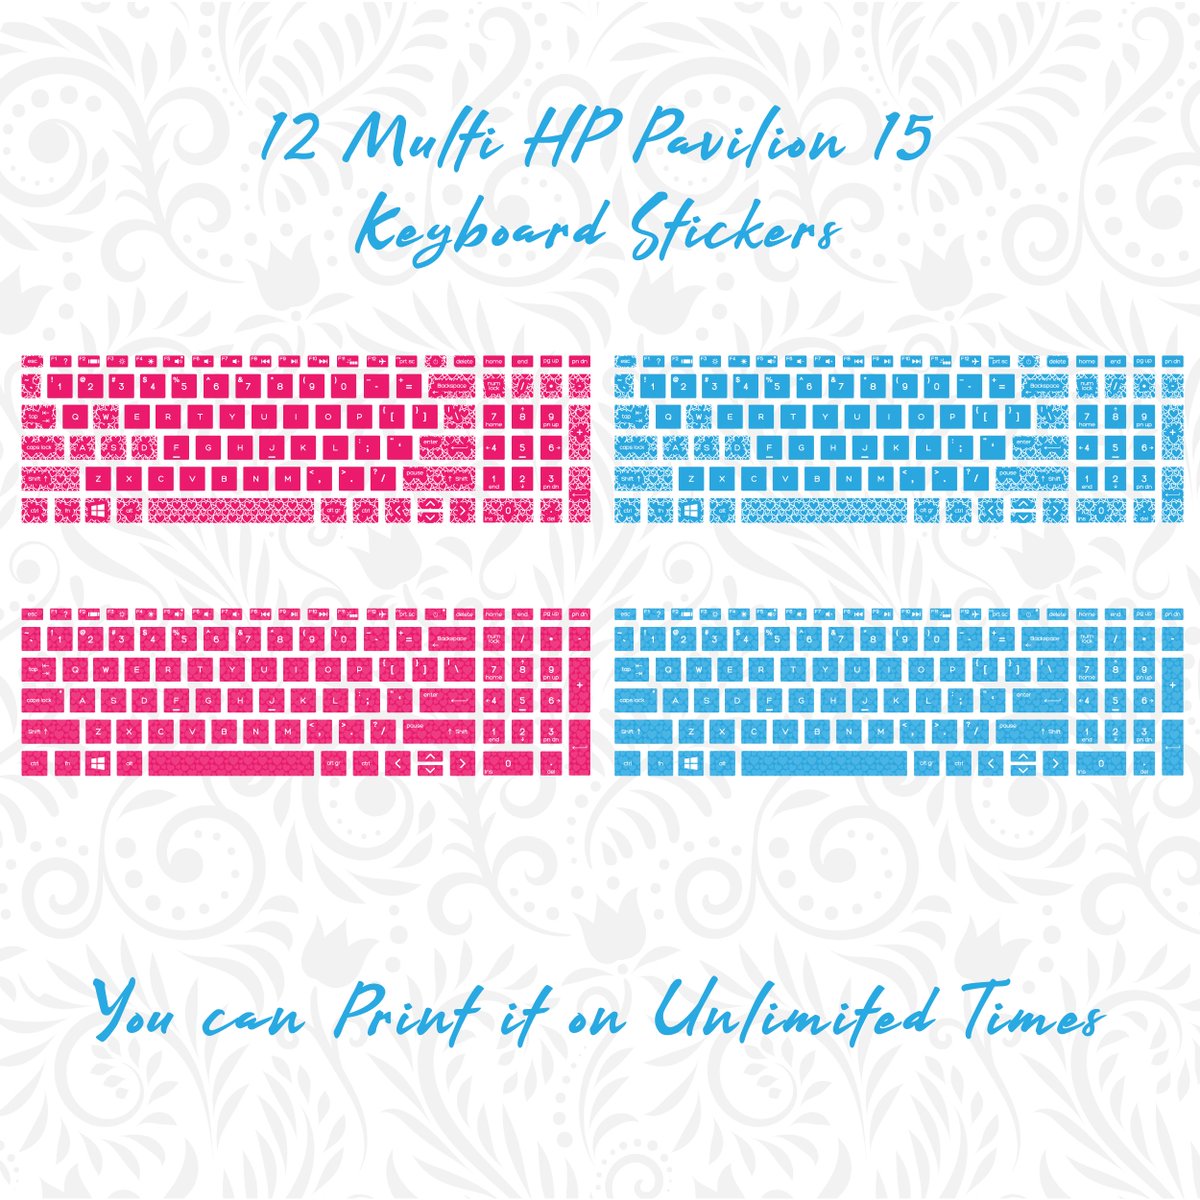 #keyboardstickers #laptopskin #hppavilion #hpkeyboardskin
HP Pavilion 15 keyboard Stickers set includes 12 different designs, each featuring a unique pattern and color scheme, allowing users to select best suits their style. 

For Purchasing Click Here…
etsy.com/DigiArtistStor…